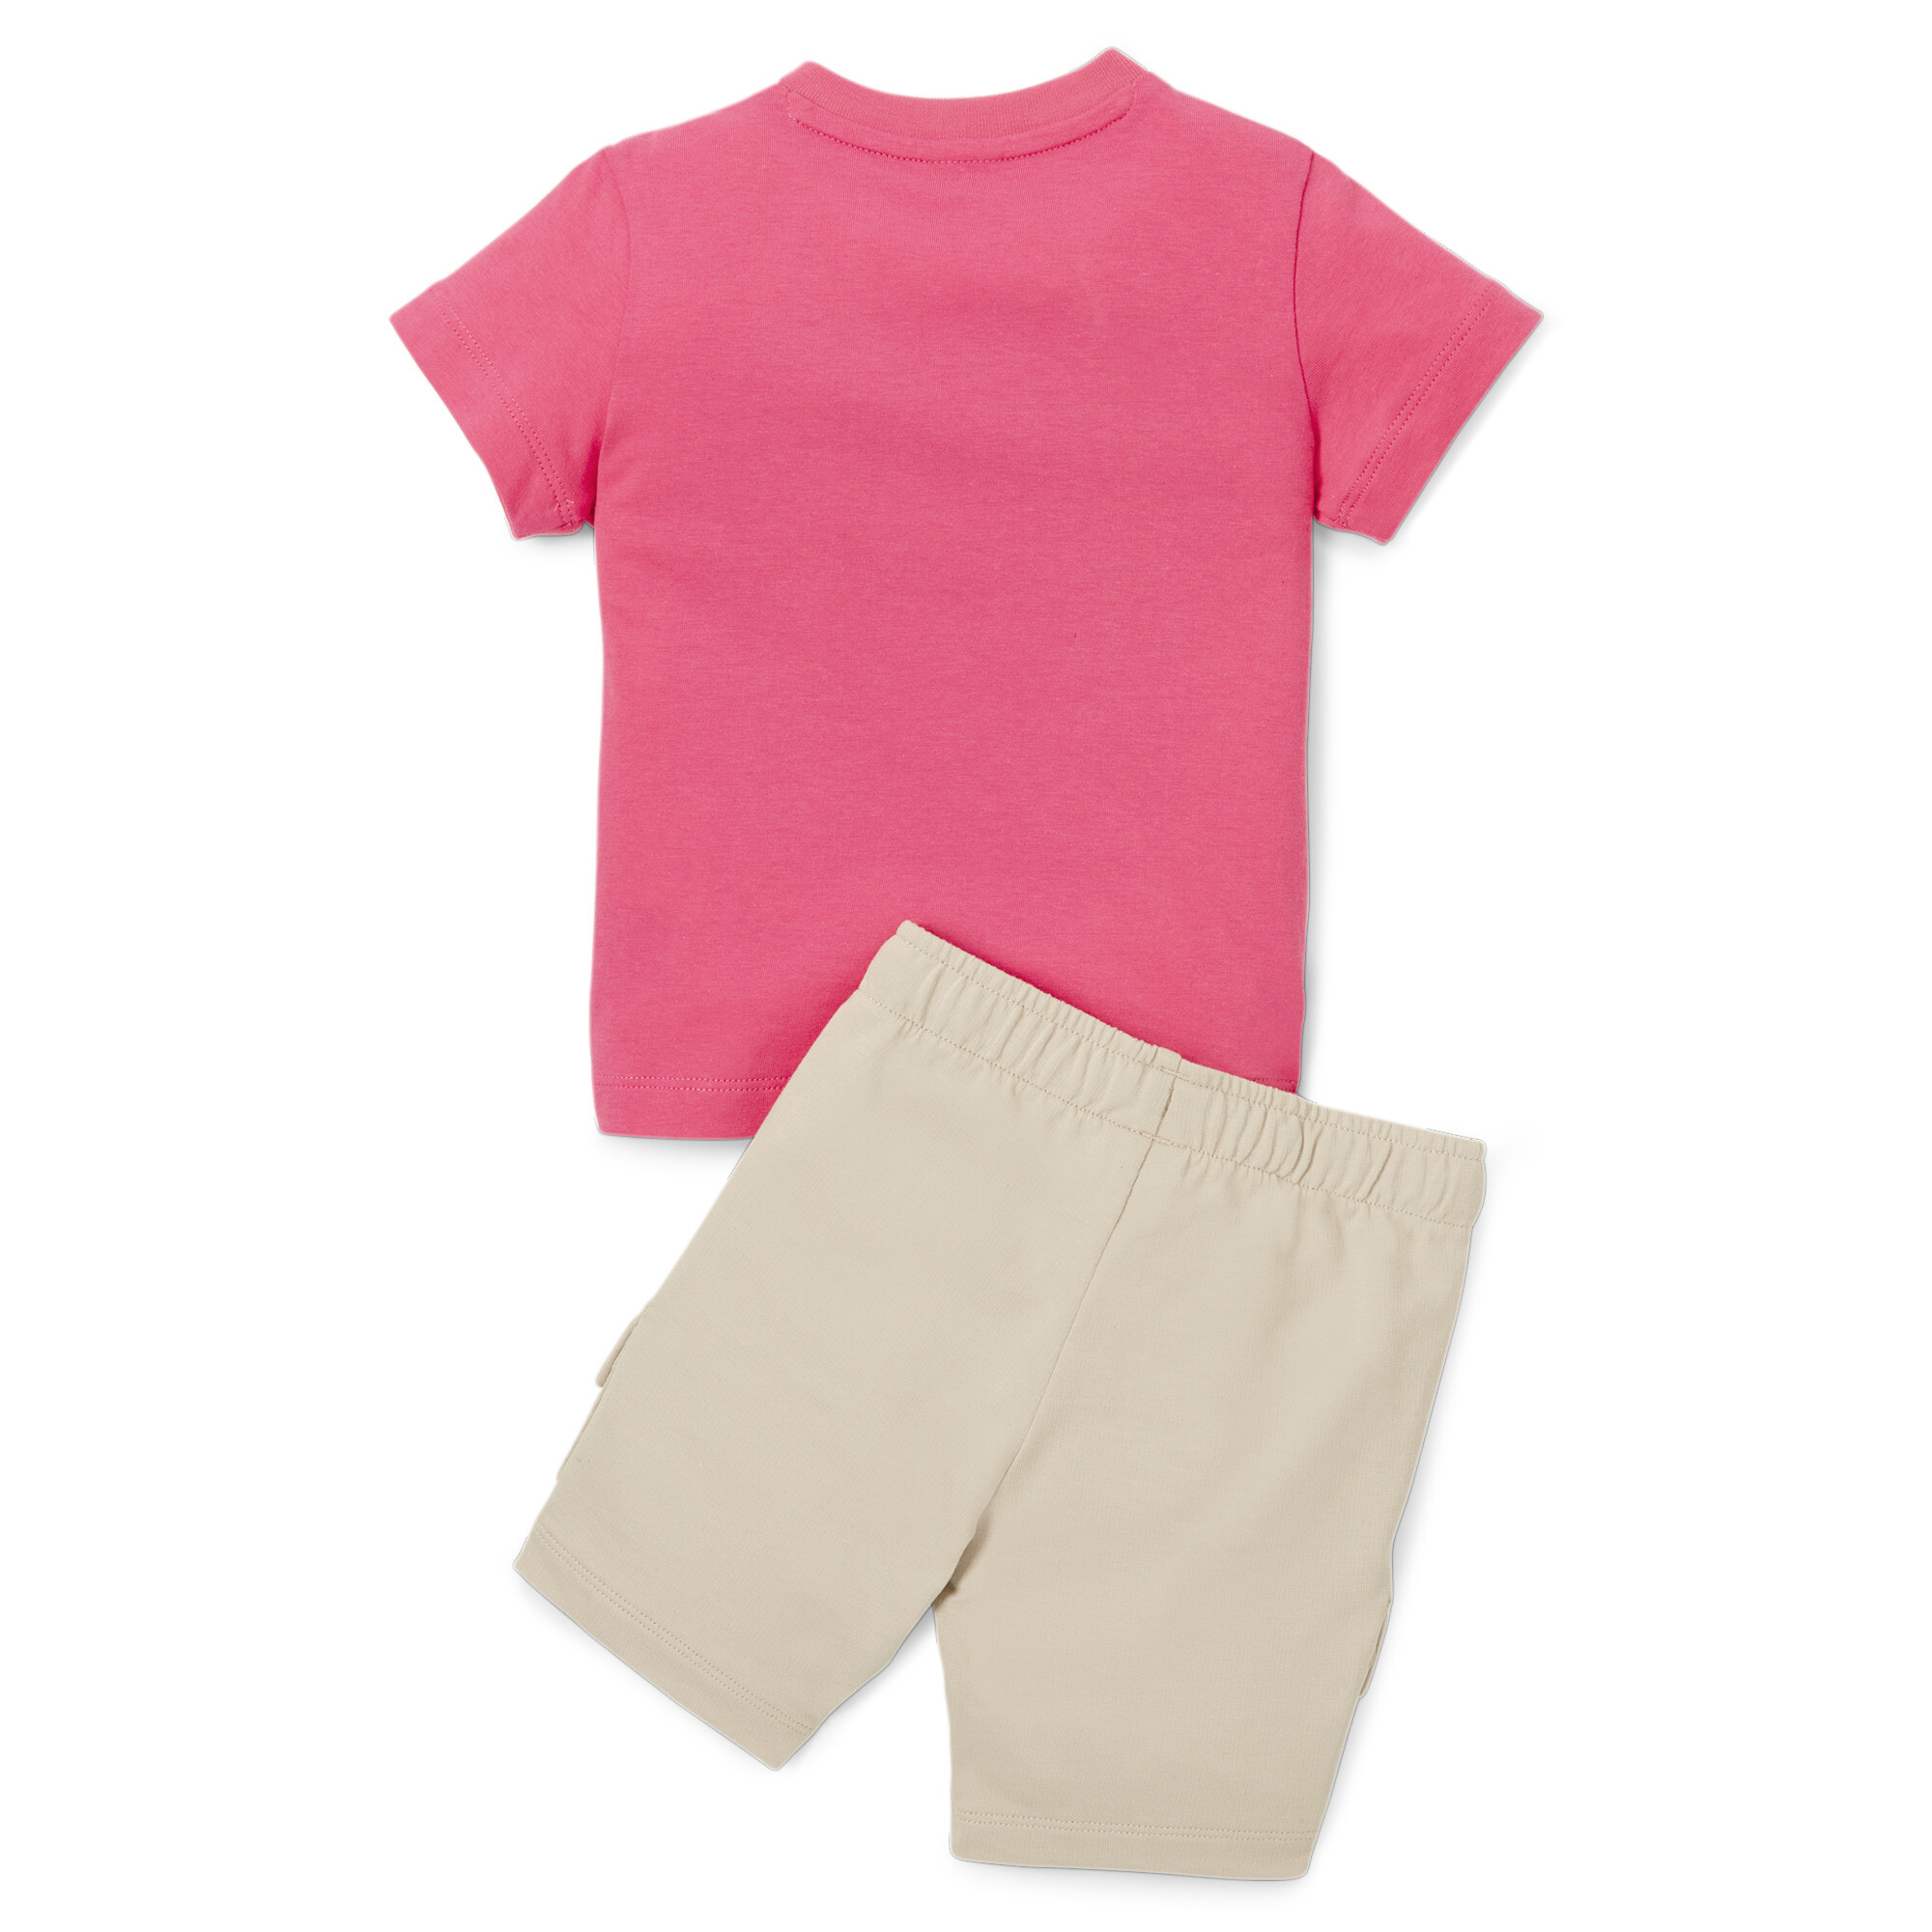 Kids' PUMA Minicats Downtown Set Baby In Pink, Size 4-6 Months